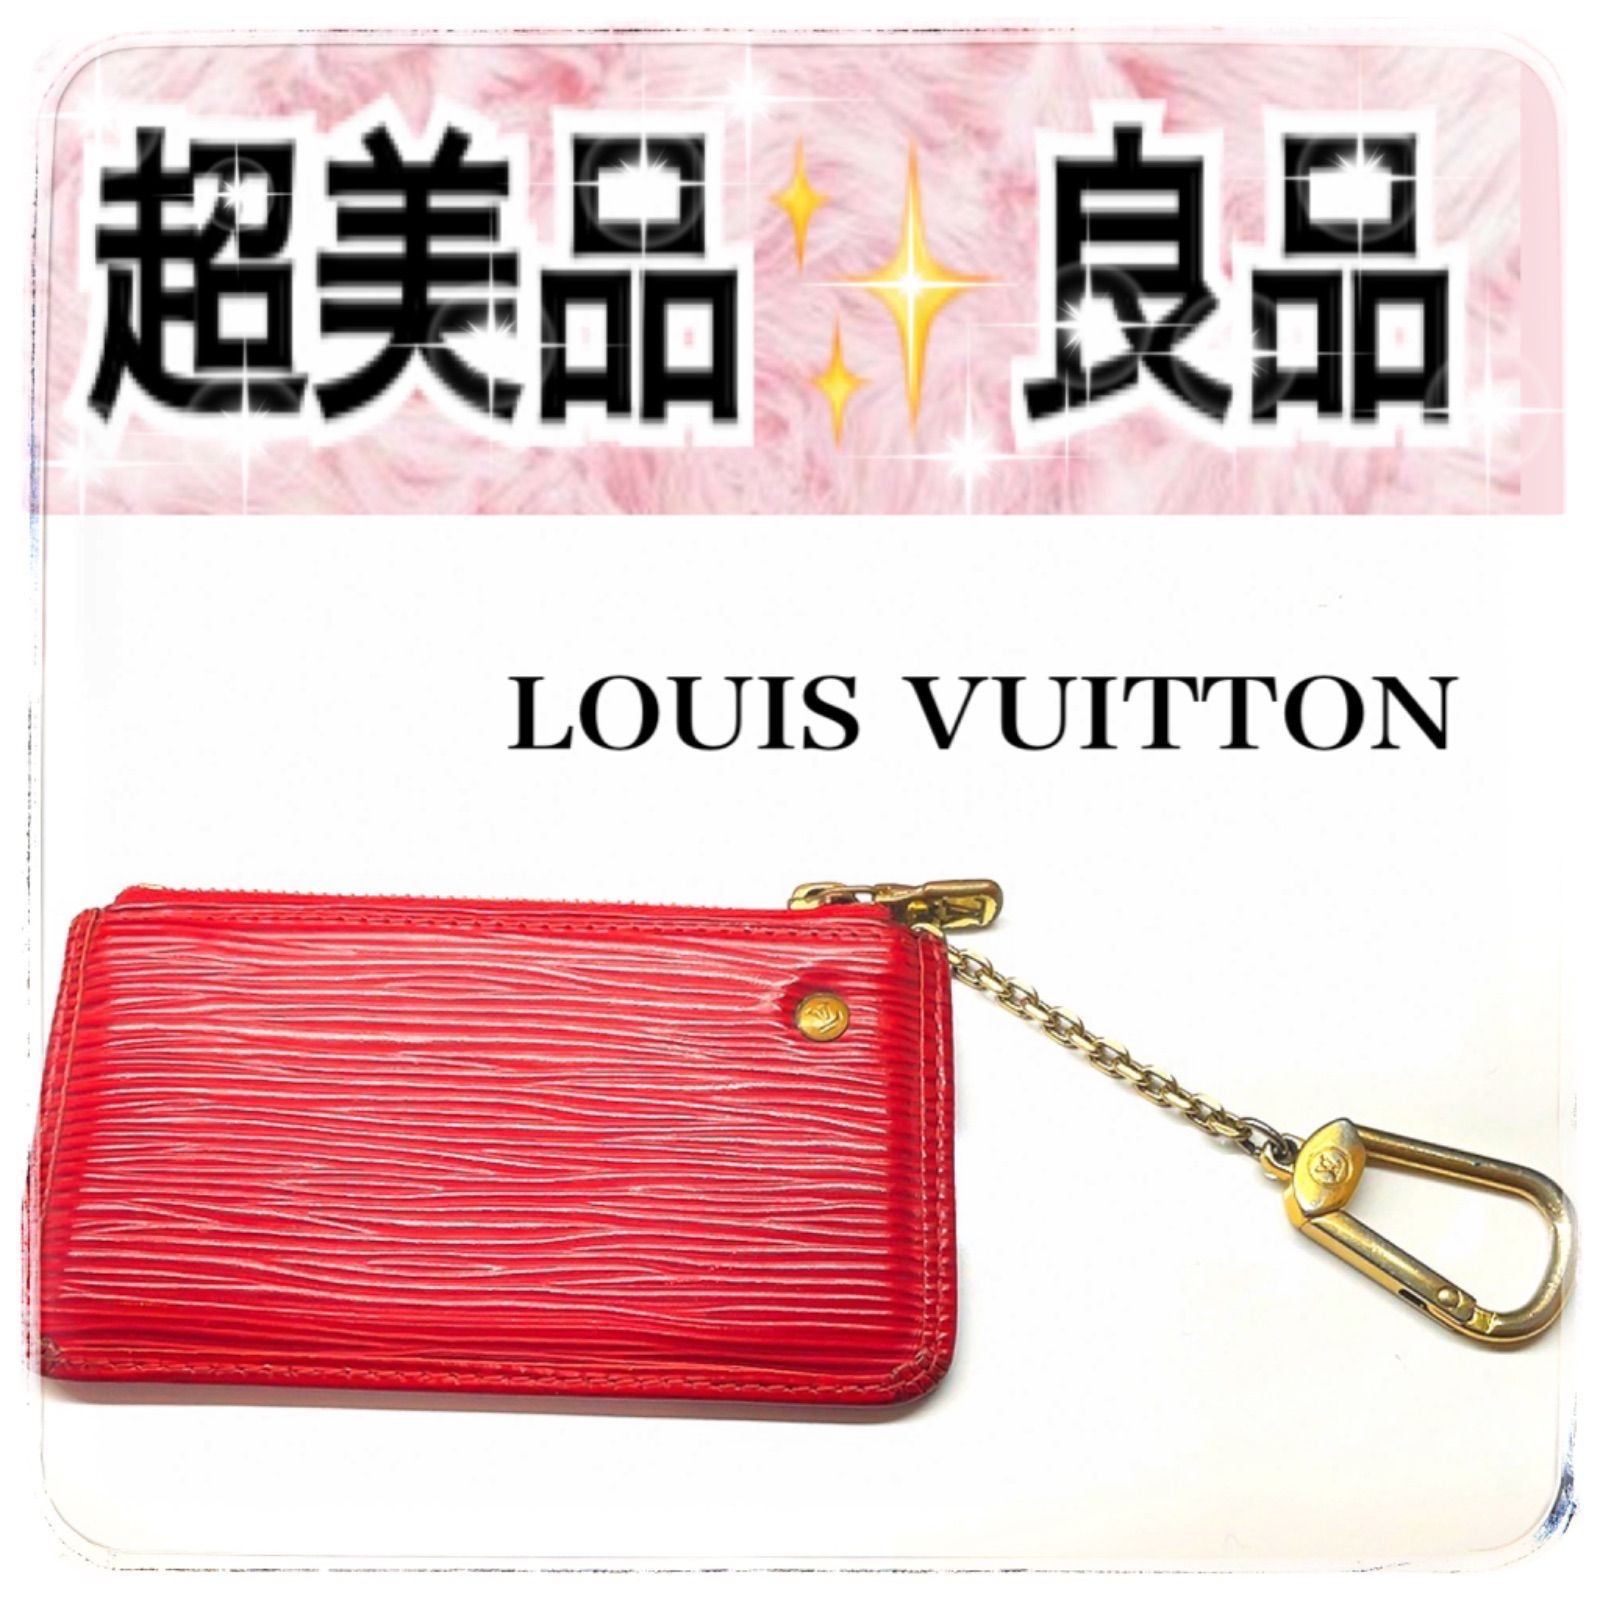 LOUIS VUITTON/ルイヴィトン エピ ポシェット クレ 【中古】ルイ ...